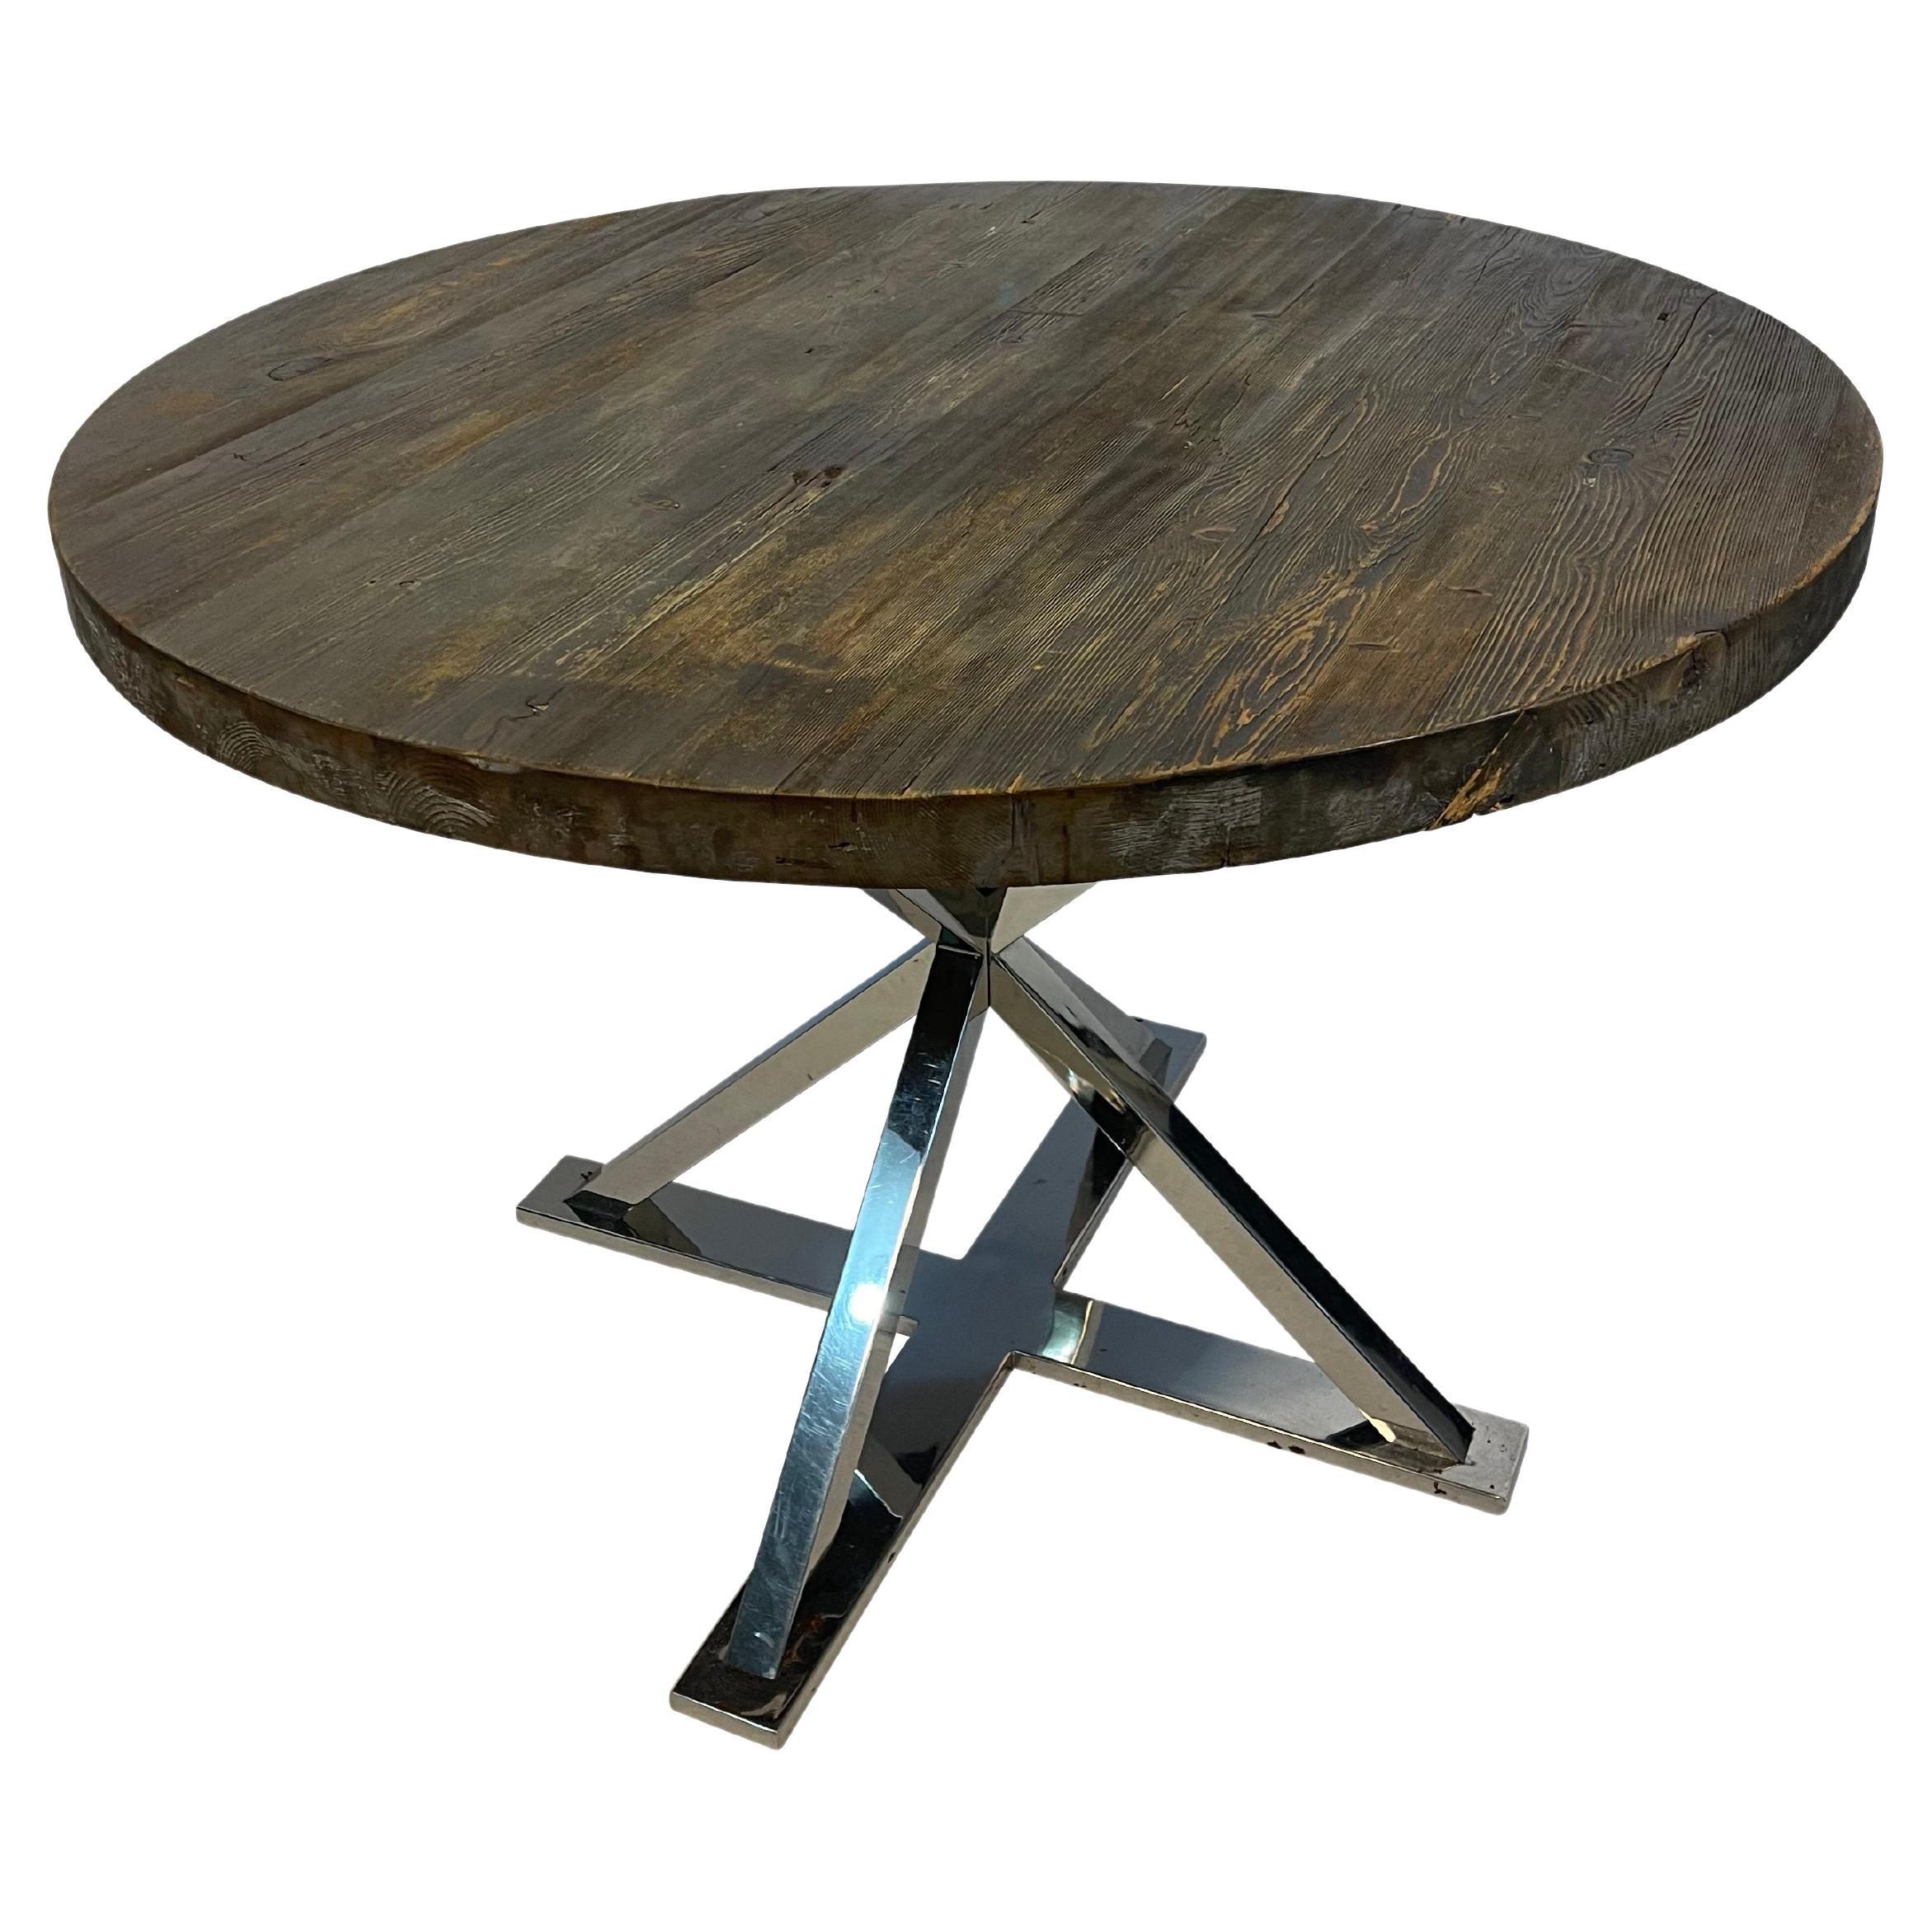  Rustic Wood Top   Round Dining Table with Modern Chrome Base  For Sale